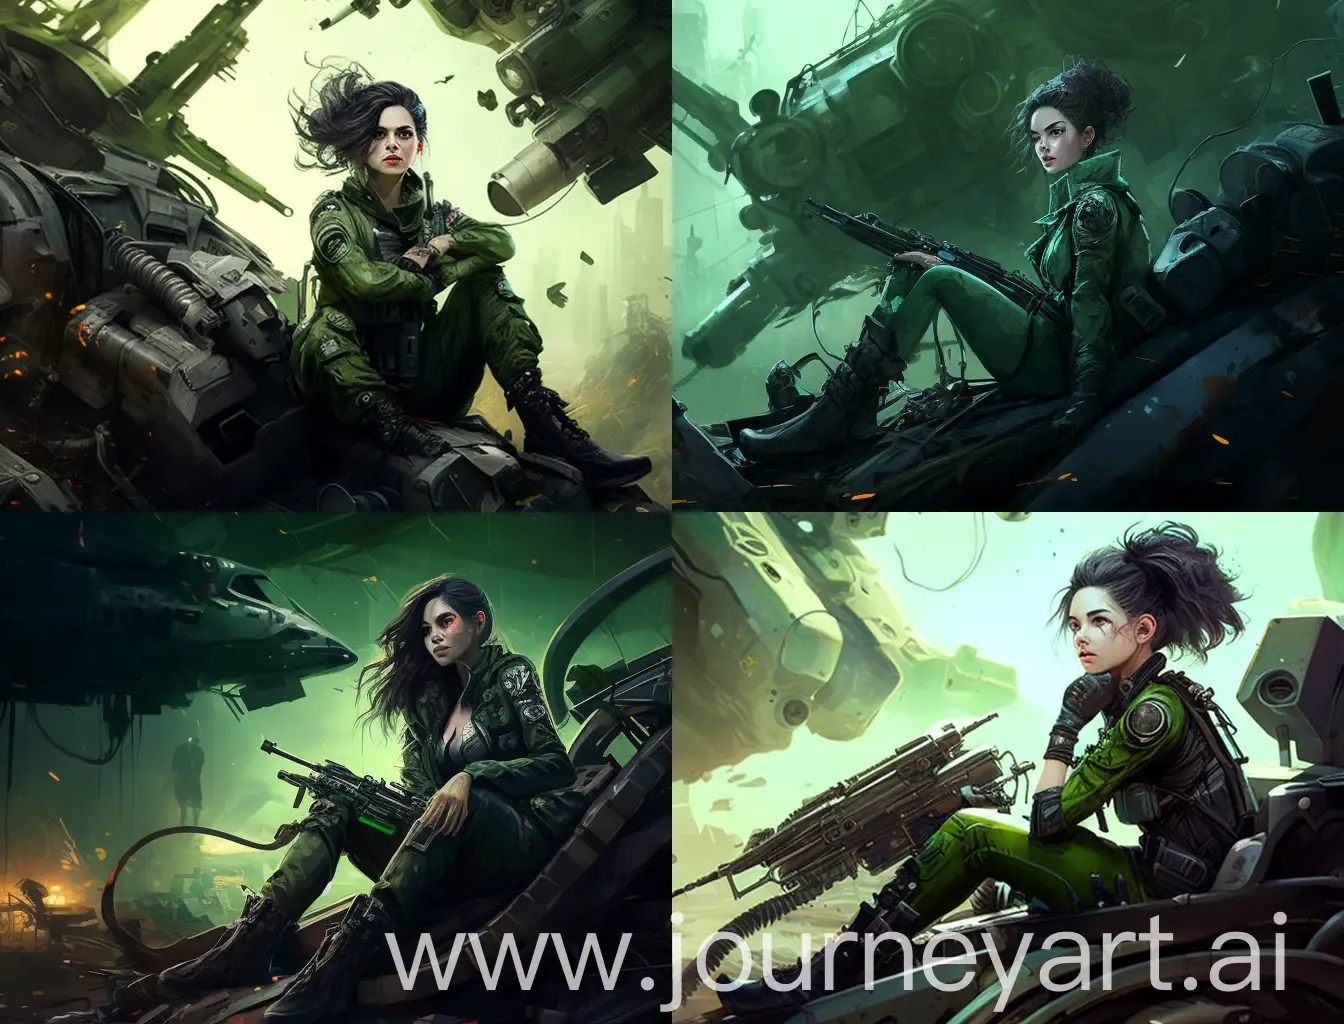 Fantastical space background in the style of contemporary art, a military girl in a green combat uniform sits on a huge tank, cleaning her sniper rifle. Hair are dark, short, next to her lies destroyed enemy.